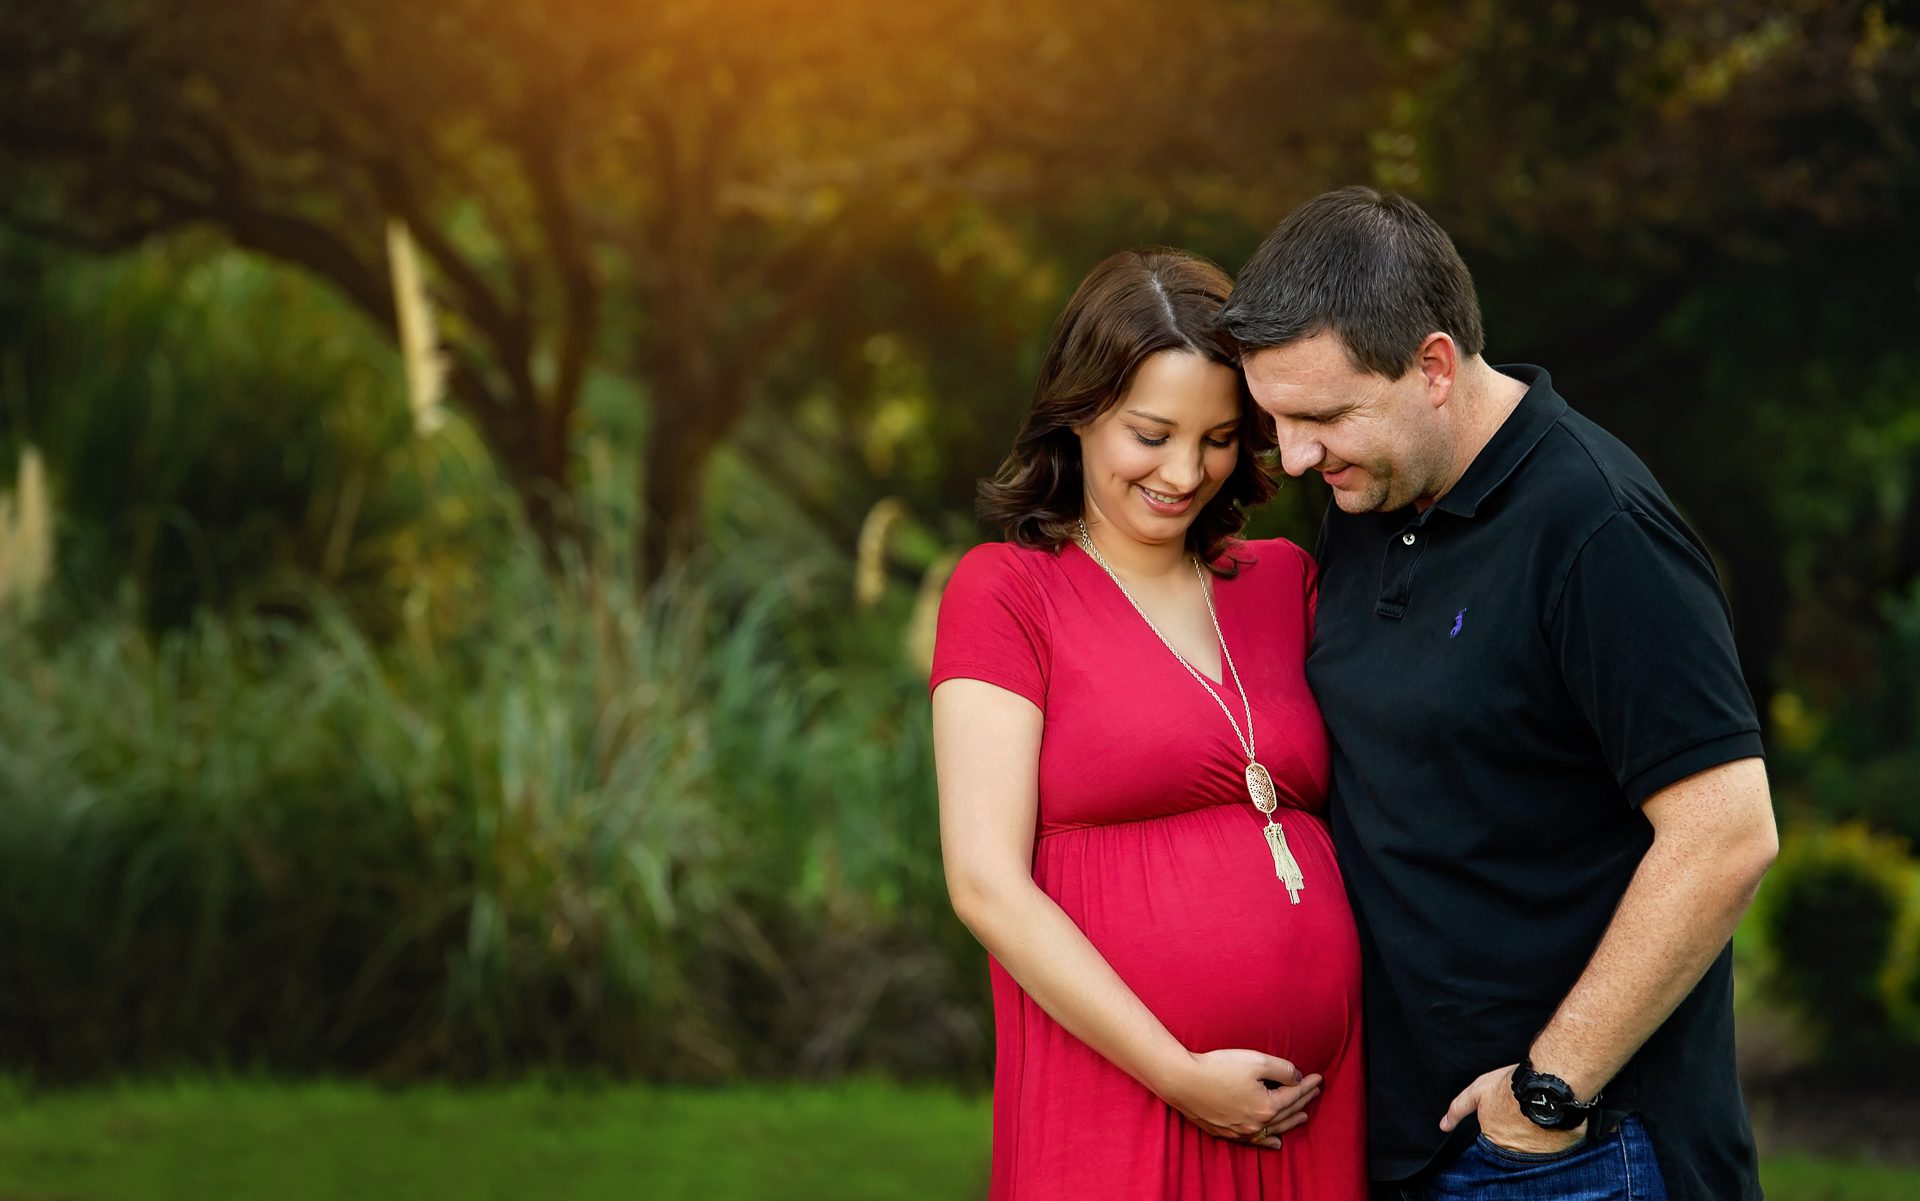 Parents-to-be admiring their baby bump for maternity photography - Natalie Roberson Photography